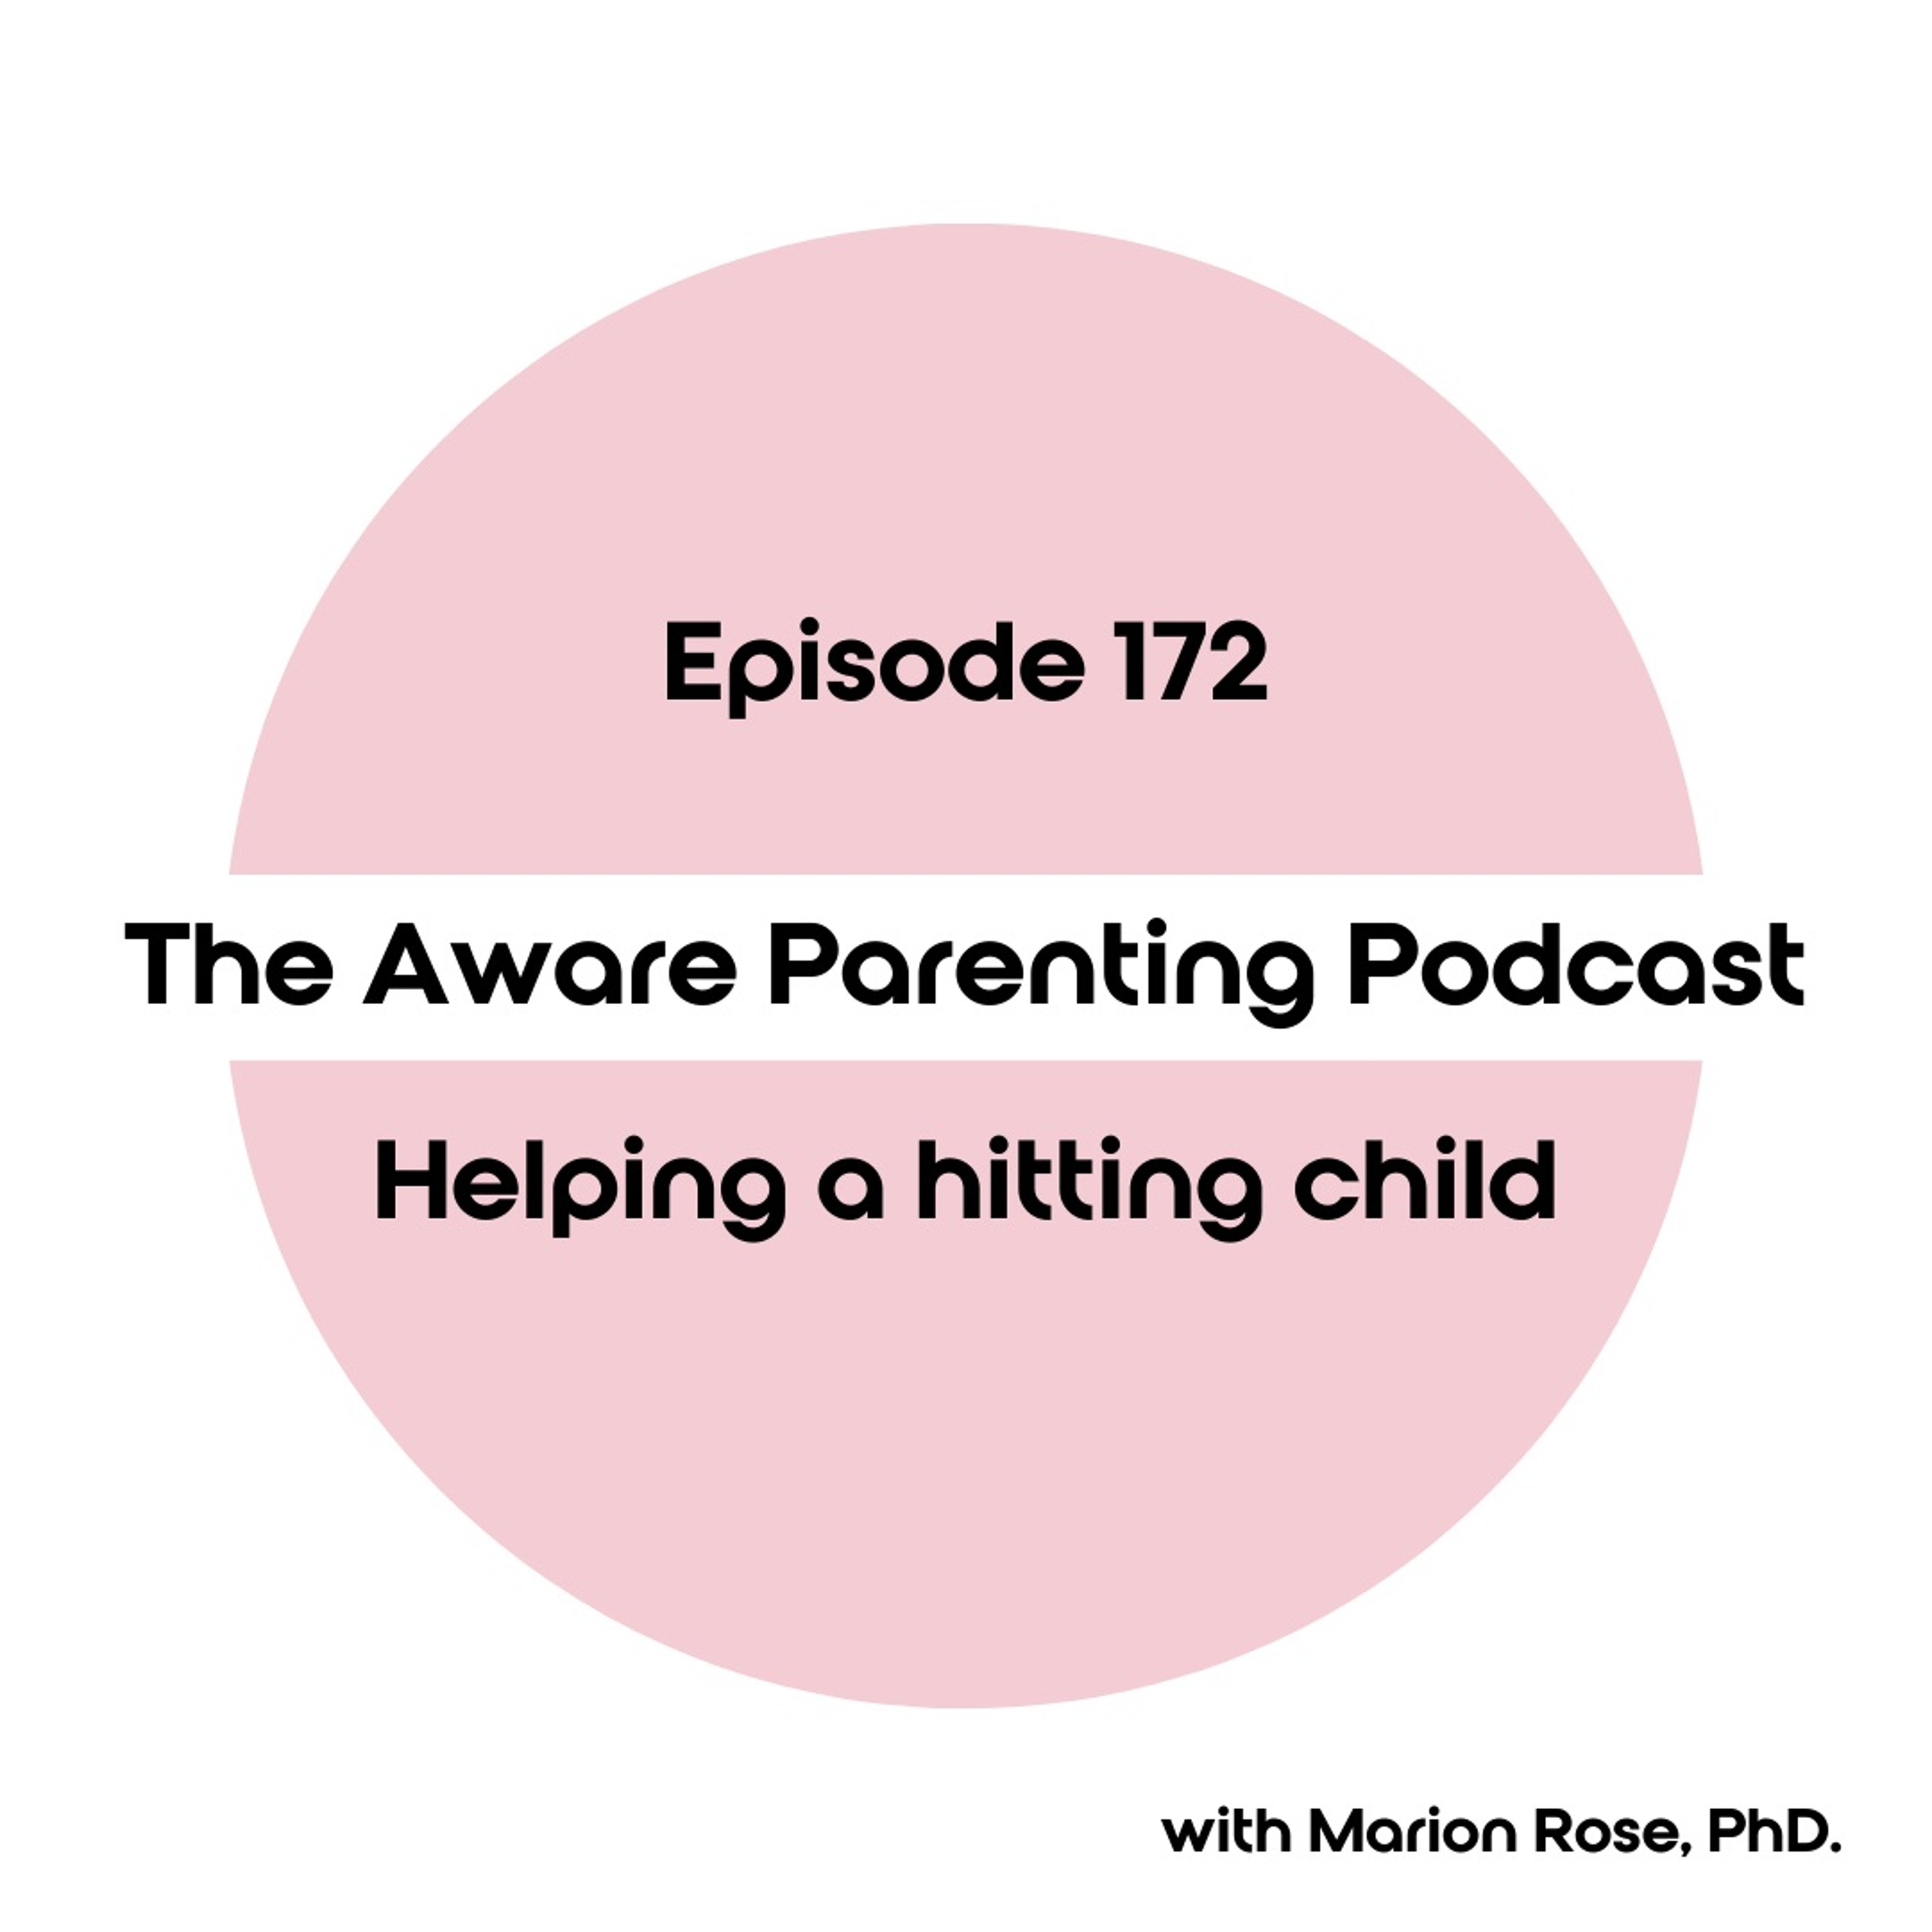 Episode 172: Helping a hitting child